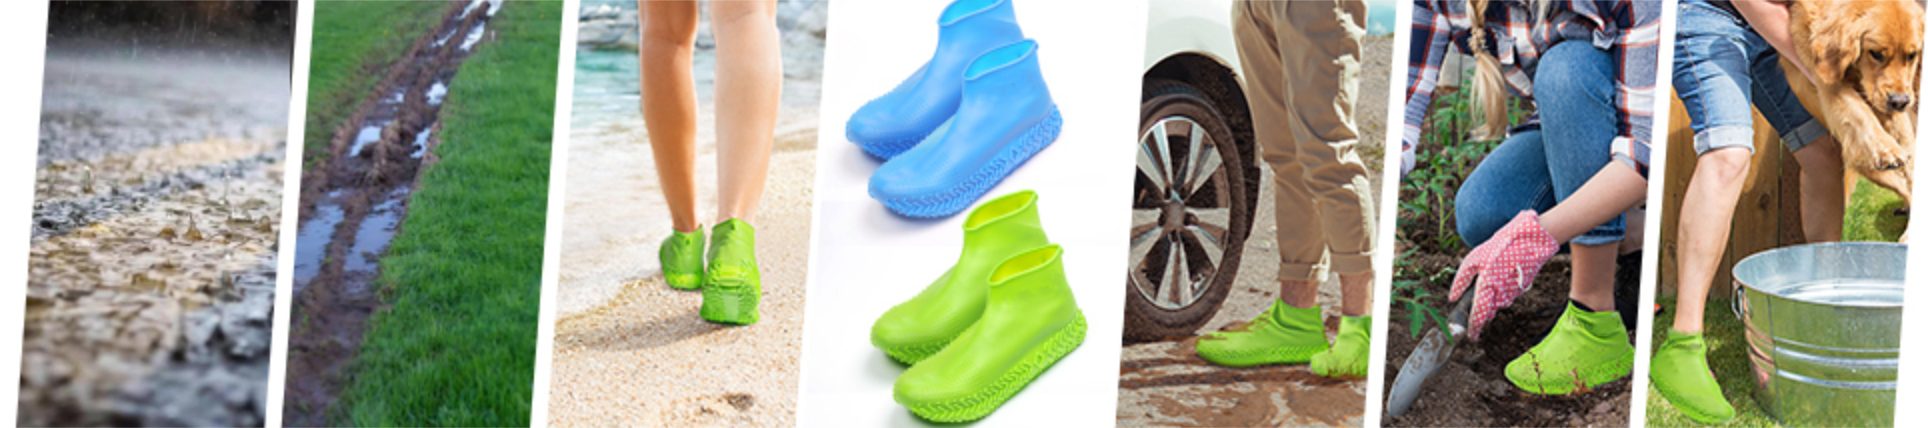 trendbaron waterproof shoe rain covers multiple colors anti slip durable silicone for sneakers leather shoes foldable